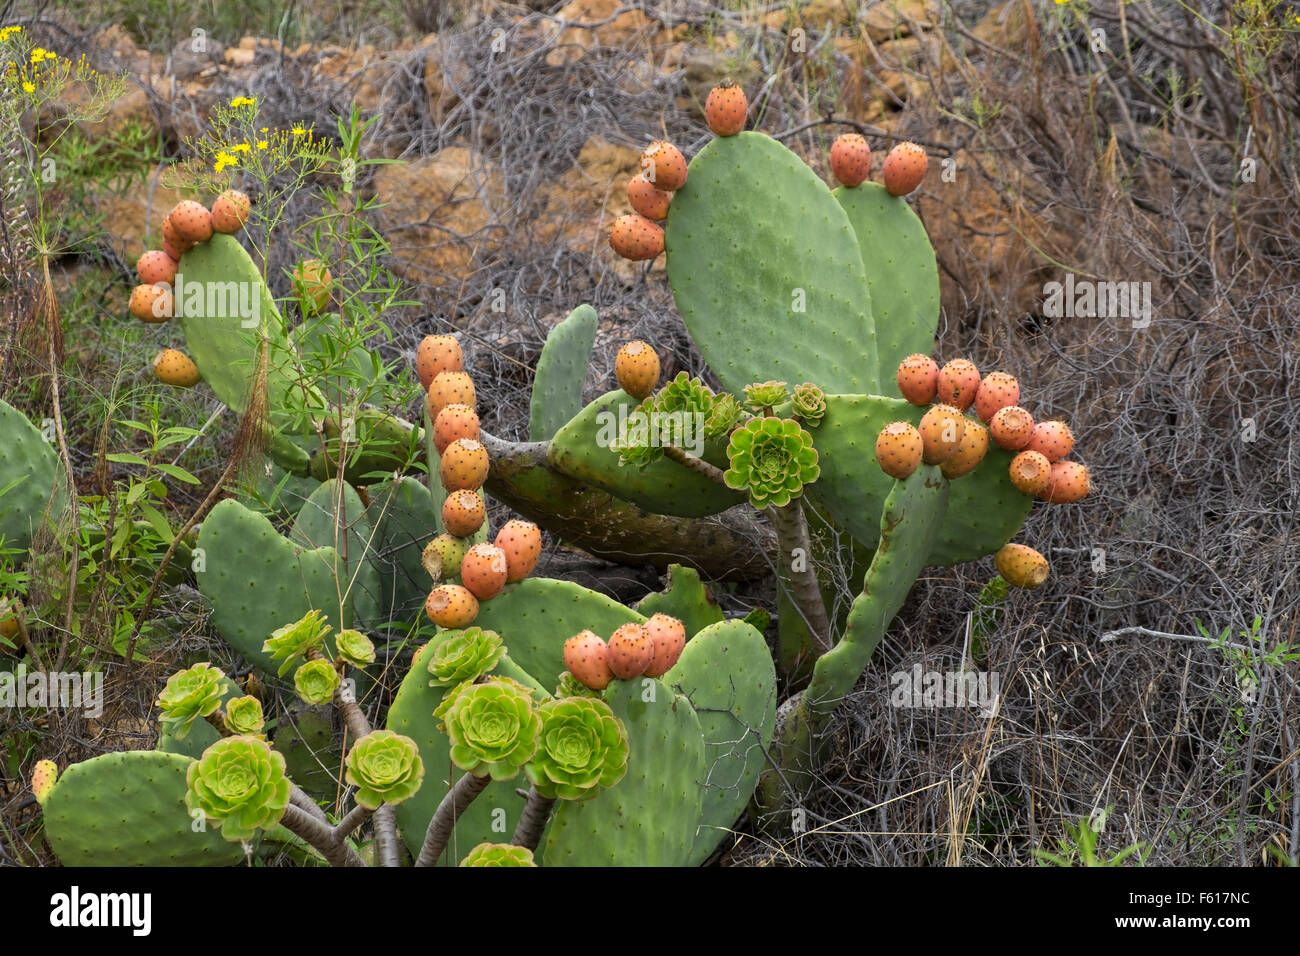 Opuntia ficus indica, prickly pear, cactus, fruit, growing in a rural area of Tenerife, Canary Islands, Spain. Stock Photo